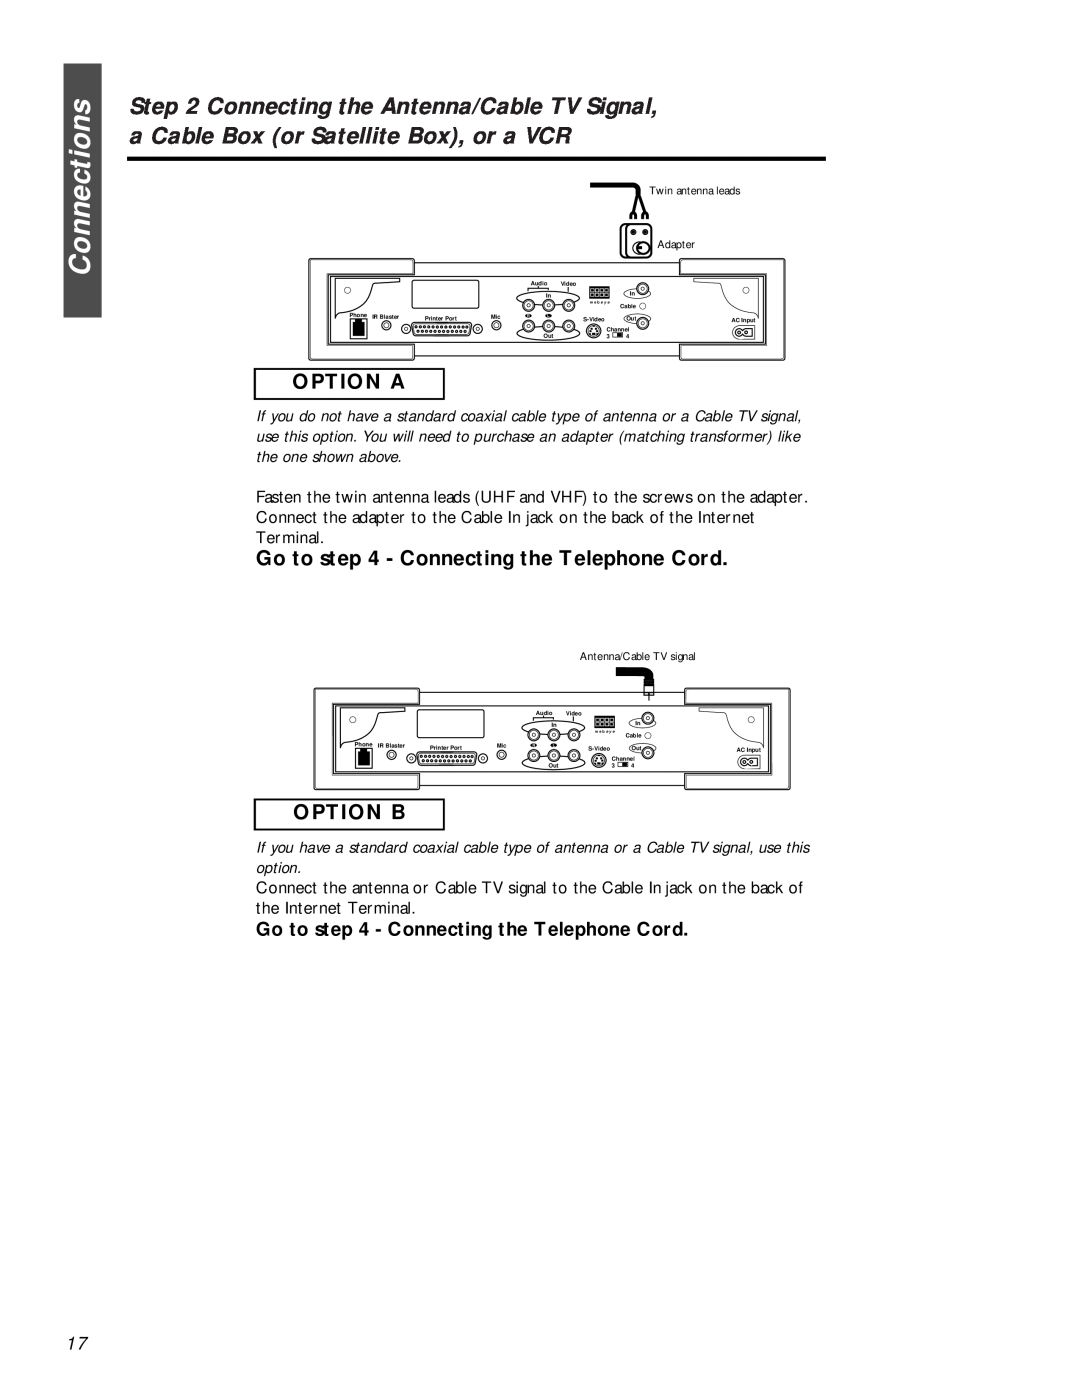 Philips MAT972KB QUG owner manual Go to - Connecting the Telephone Cord, Connections, Option A, Option B 